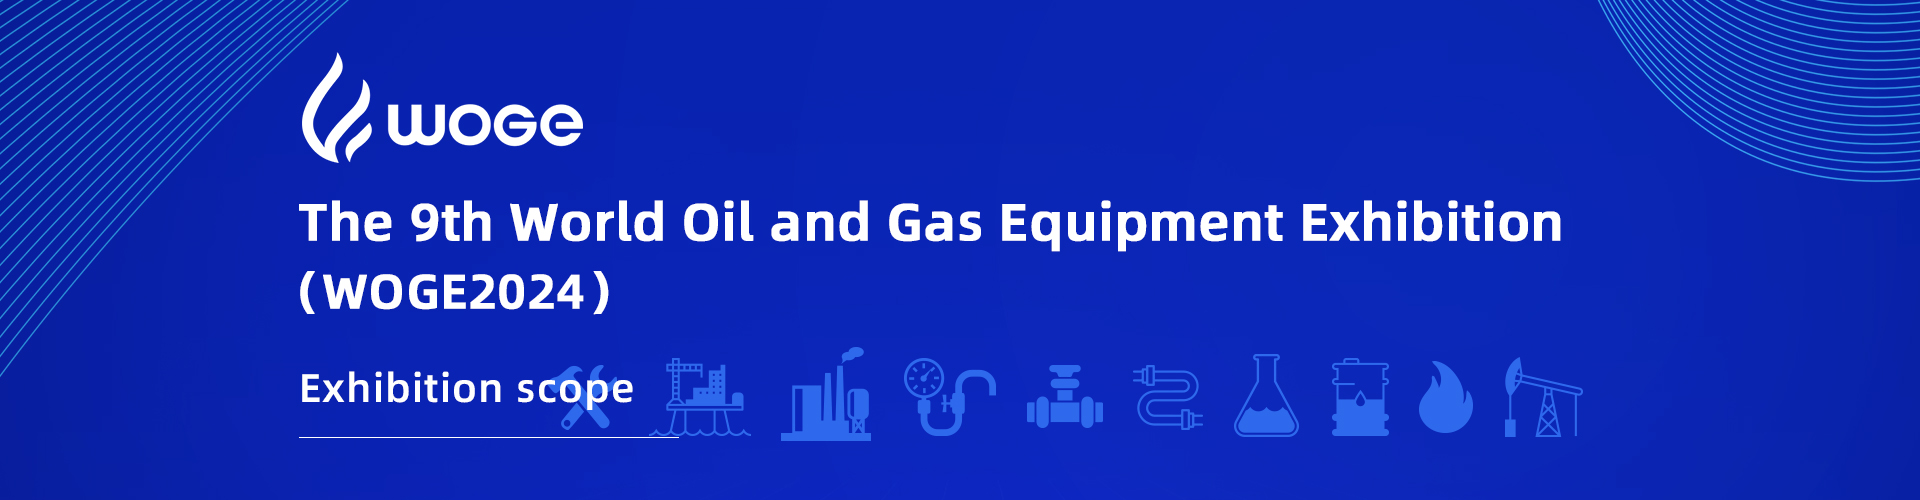 Scope of The 9th World Oil and Gas Equipment Exhibition (WOGE2024)